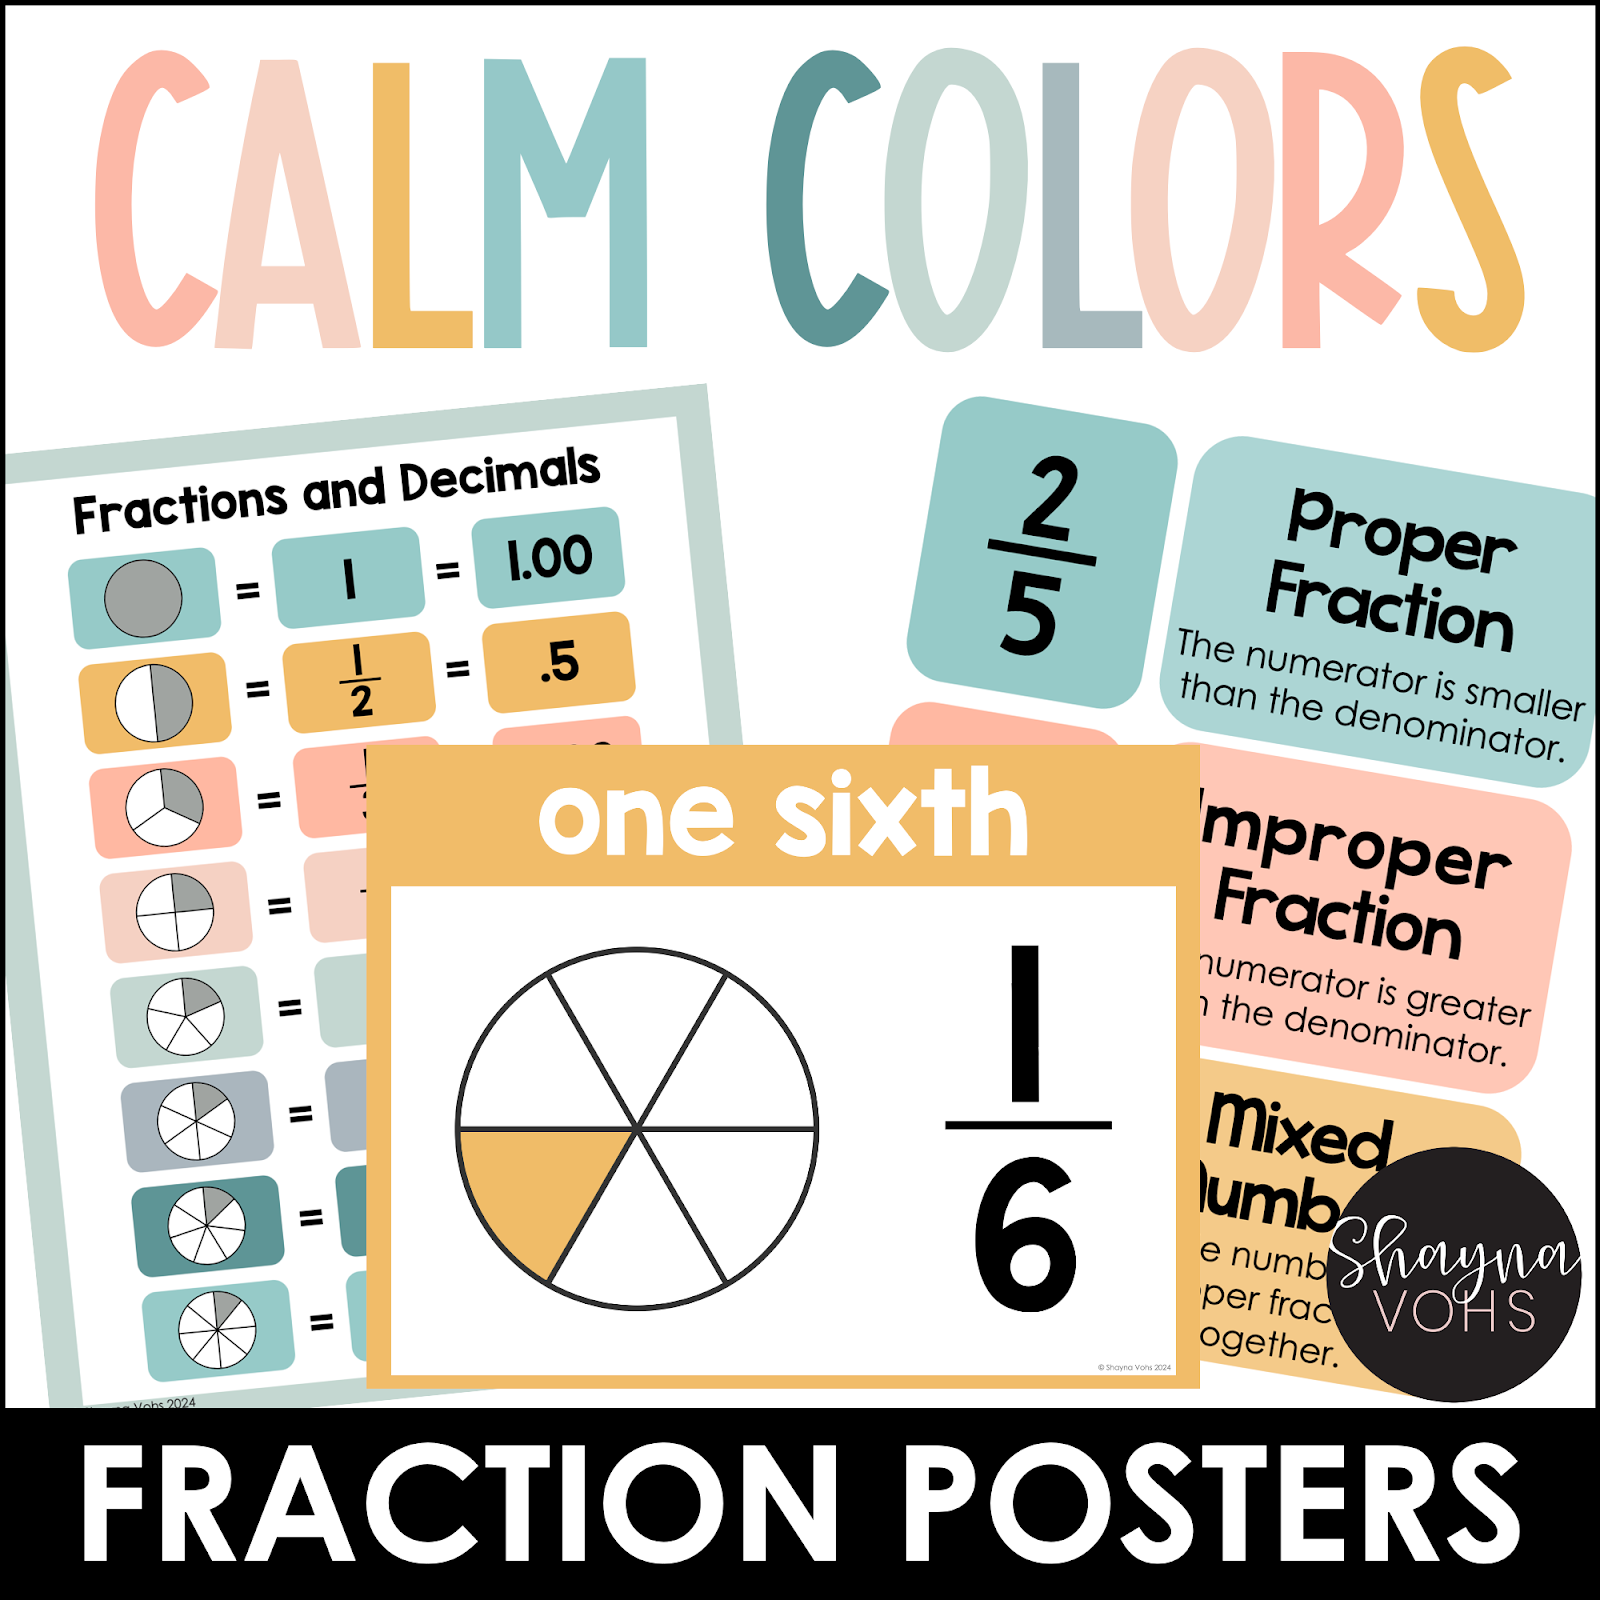 This image shows fraction anchor charts in a Calm, Pastel color scheme. 